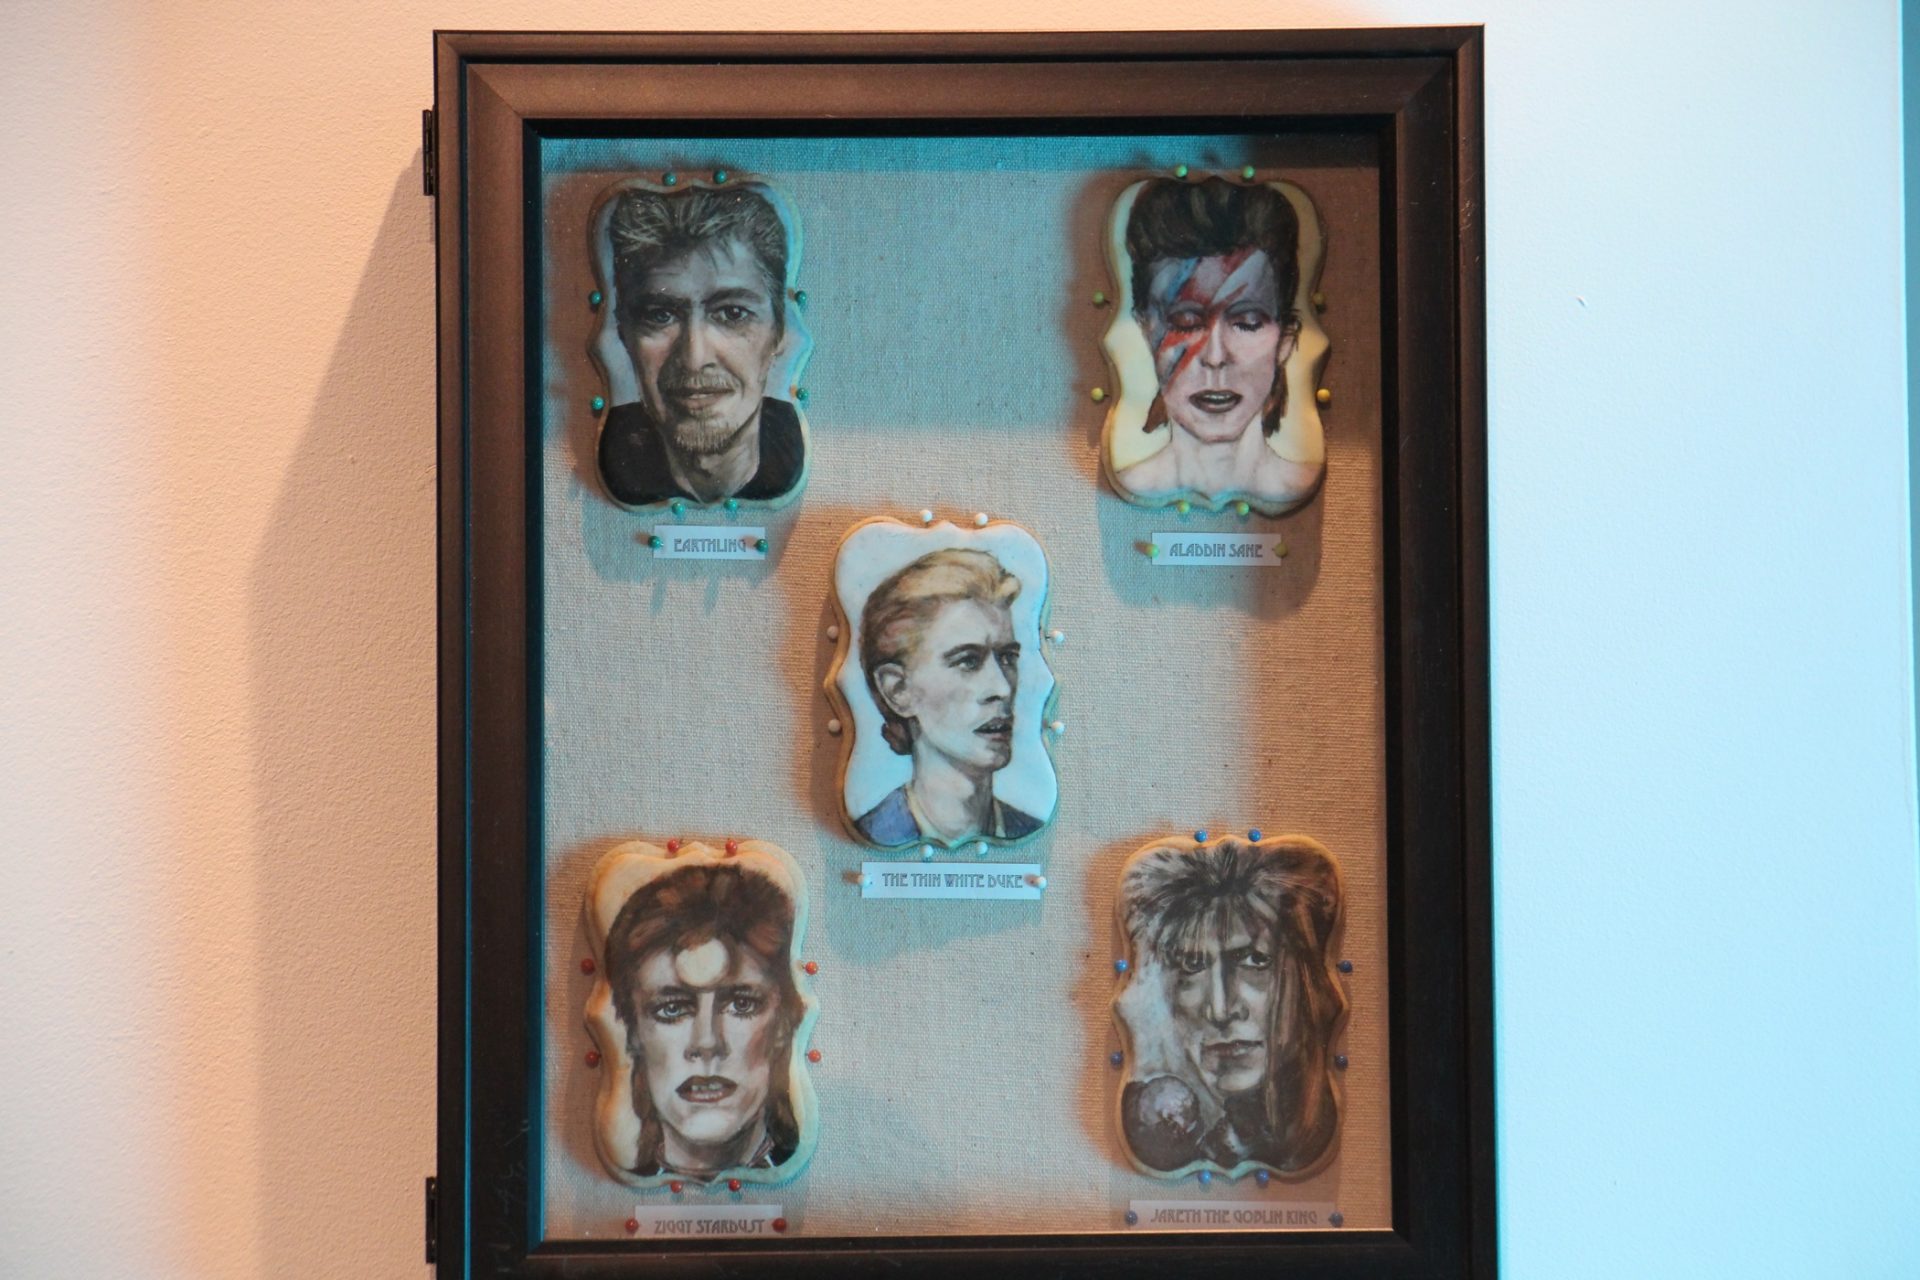 Five hand-painted sugar cookies made Jennifer Roach and titled 'Edible Rebel,' pay tribute to David Bowie's characters.